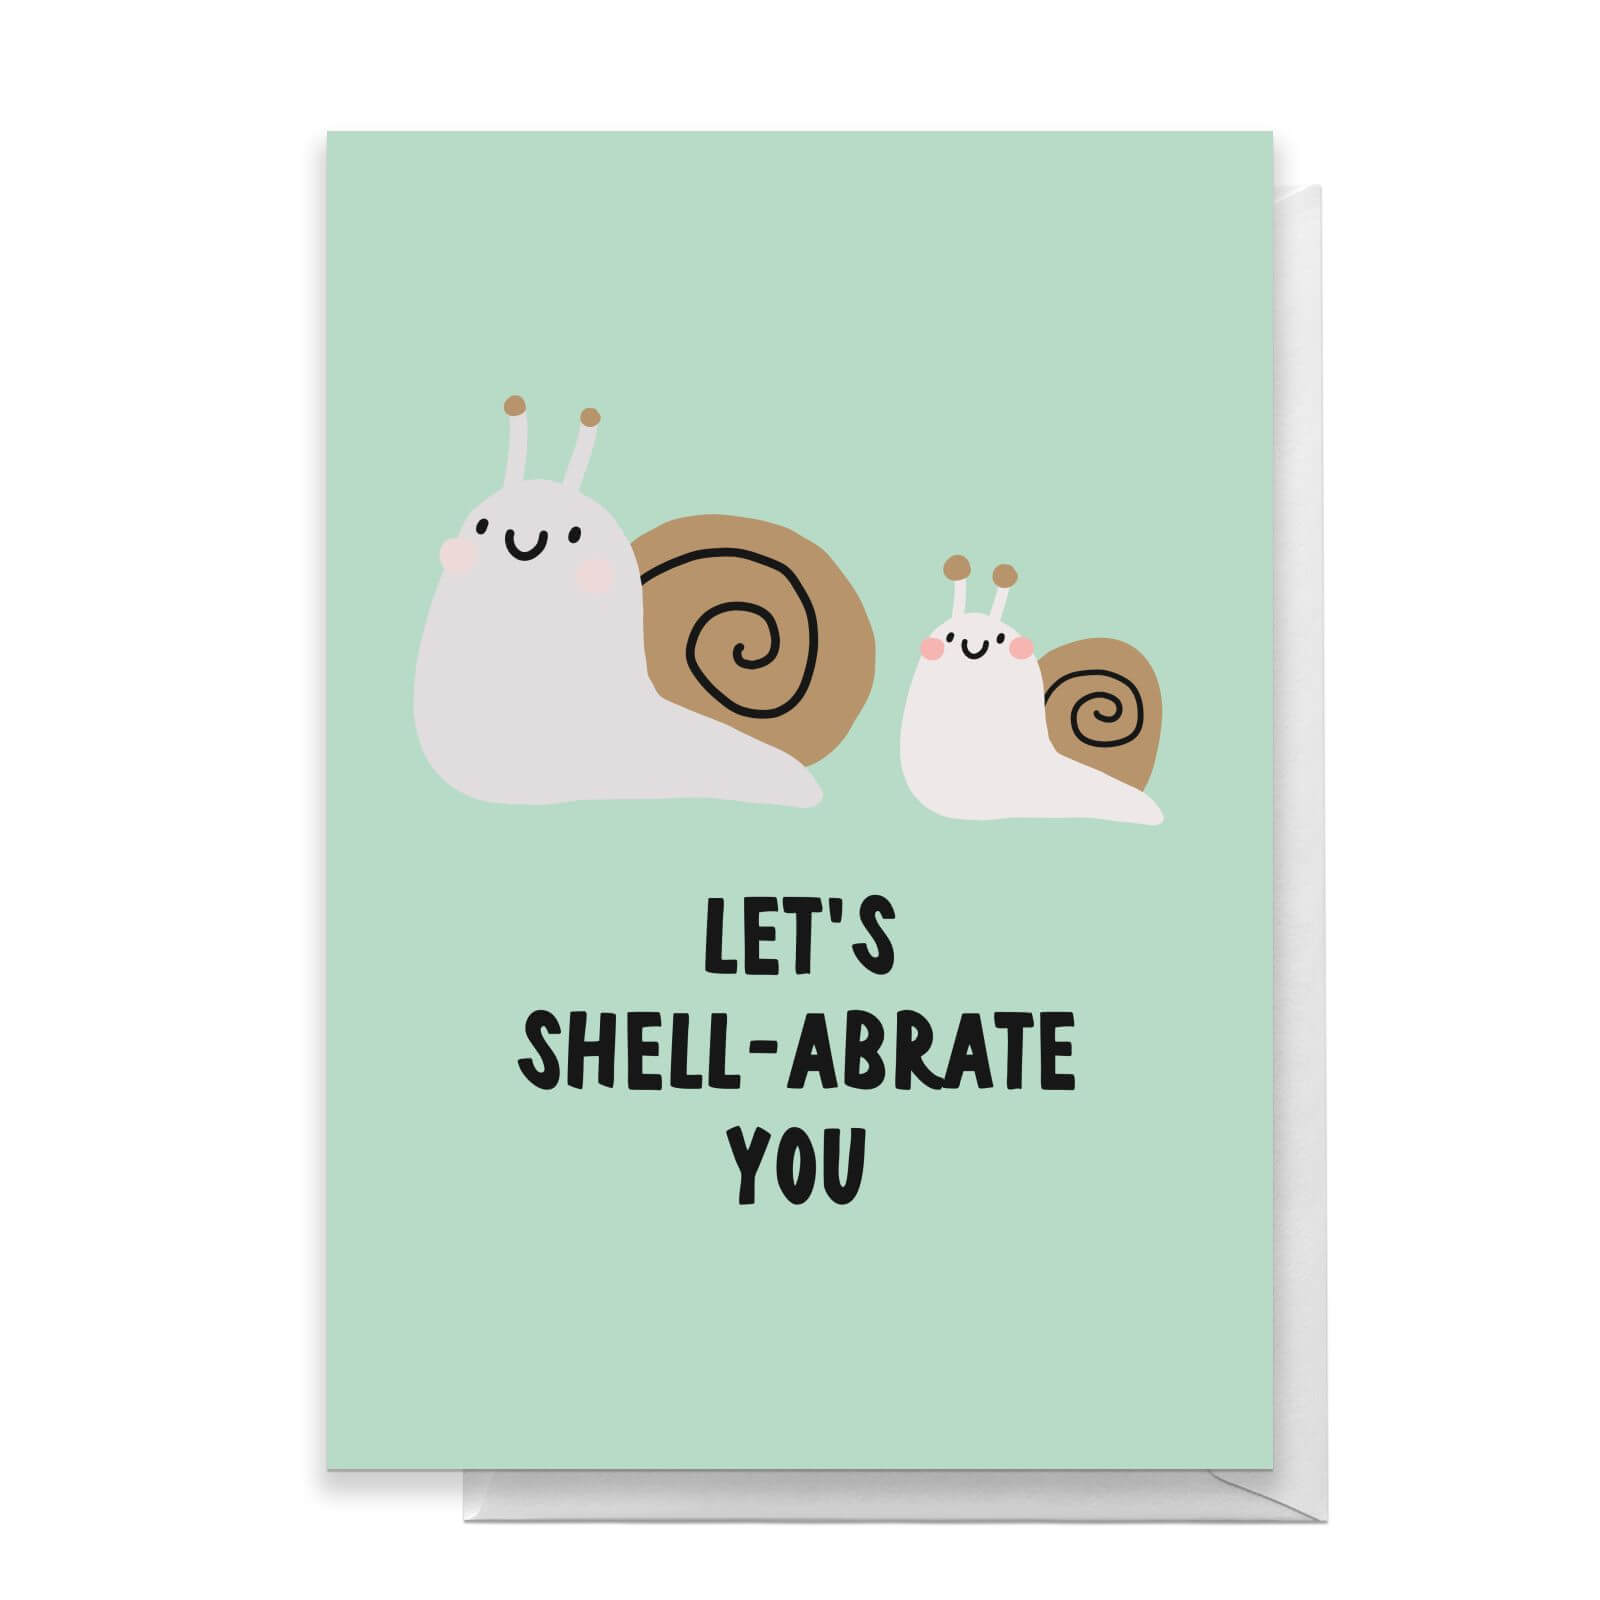 Let's Shell-abrate You Greetings Card - Standard Card